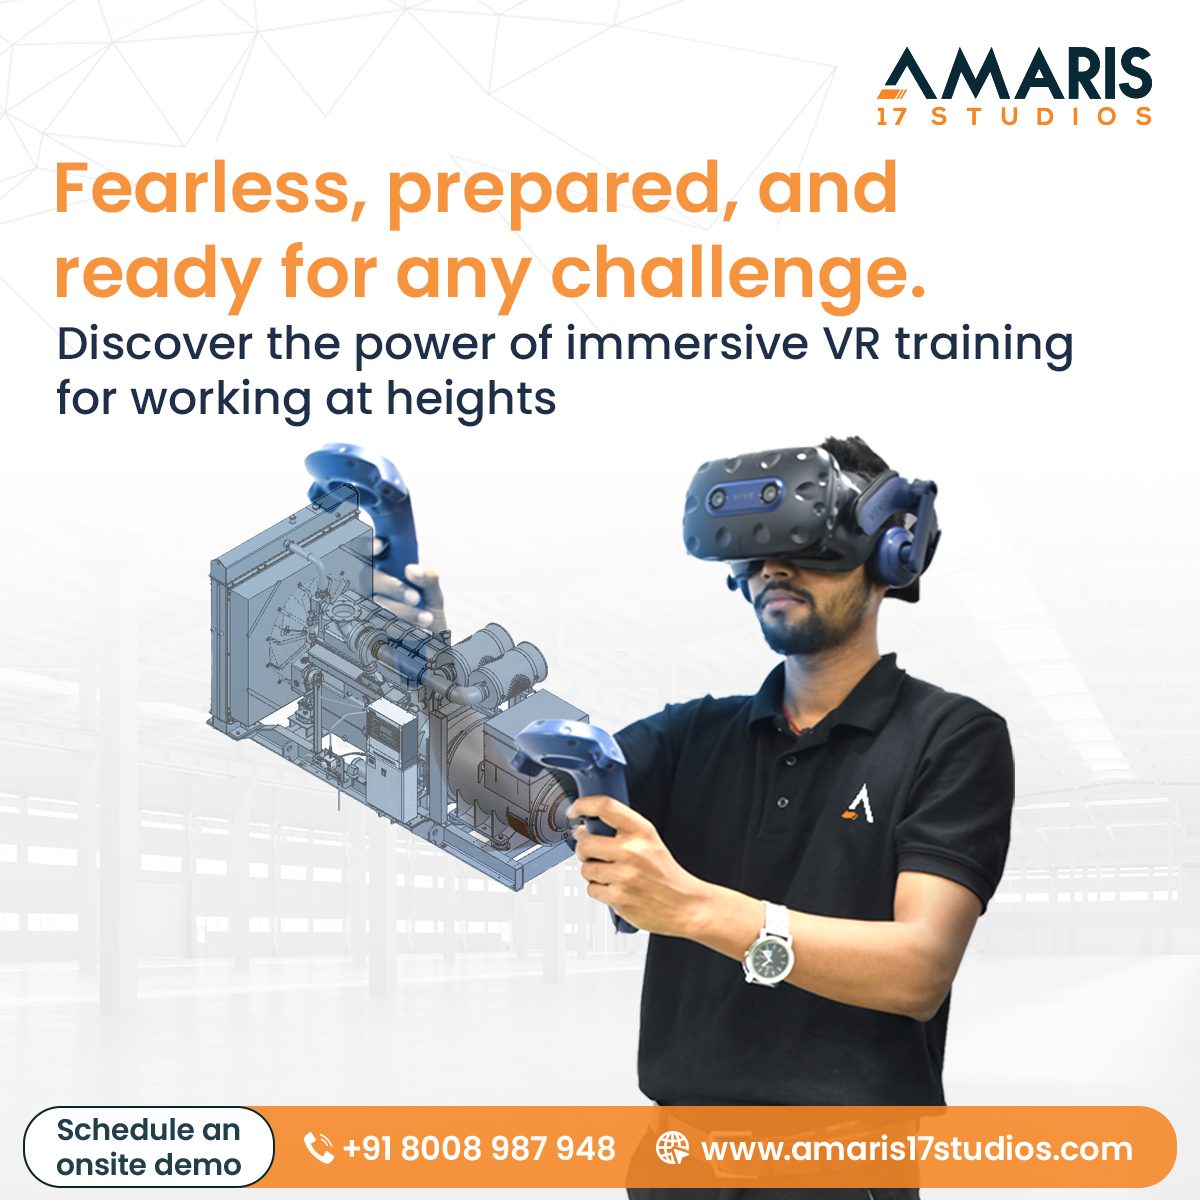 Fearless, prepared, and ready for any challenge. Discover the power of immersive VR training for working at heights

For Onsite Demo
📱 +918008987948 📧 info@amaris17studios.com 🌐 amaris17studios.com

#safetyfirst #vrtraining #workplacesafety #vrtraining #hazardawareness